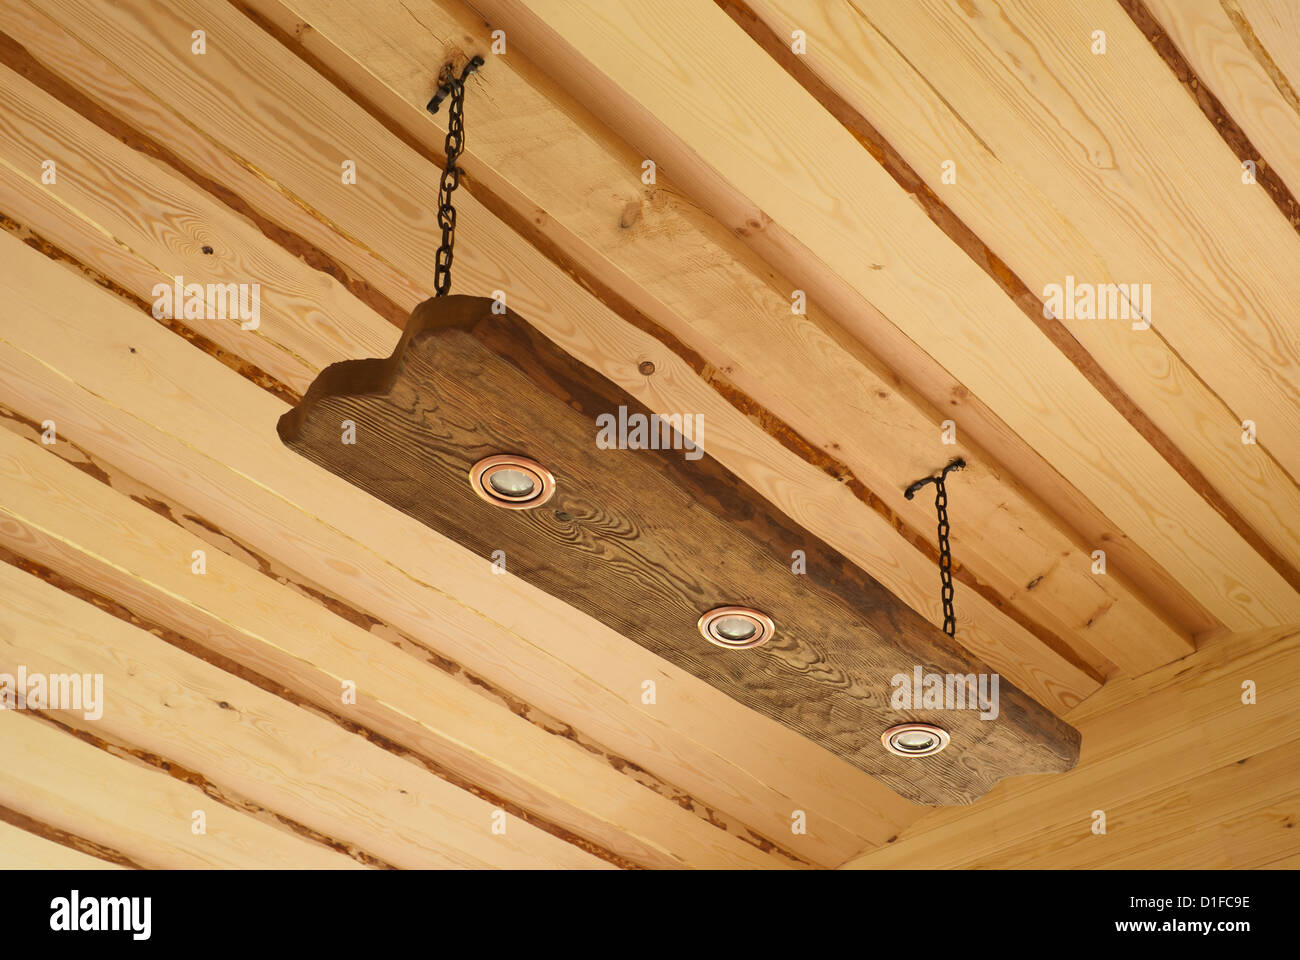 Suspended Ceiling Light In The Form Of An Oak Board With